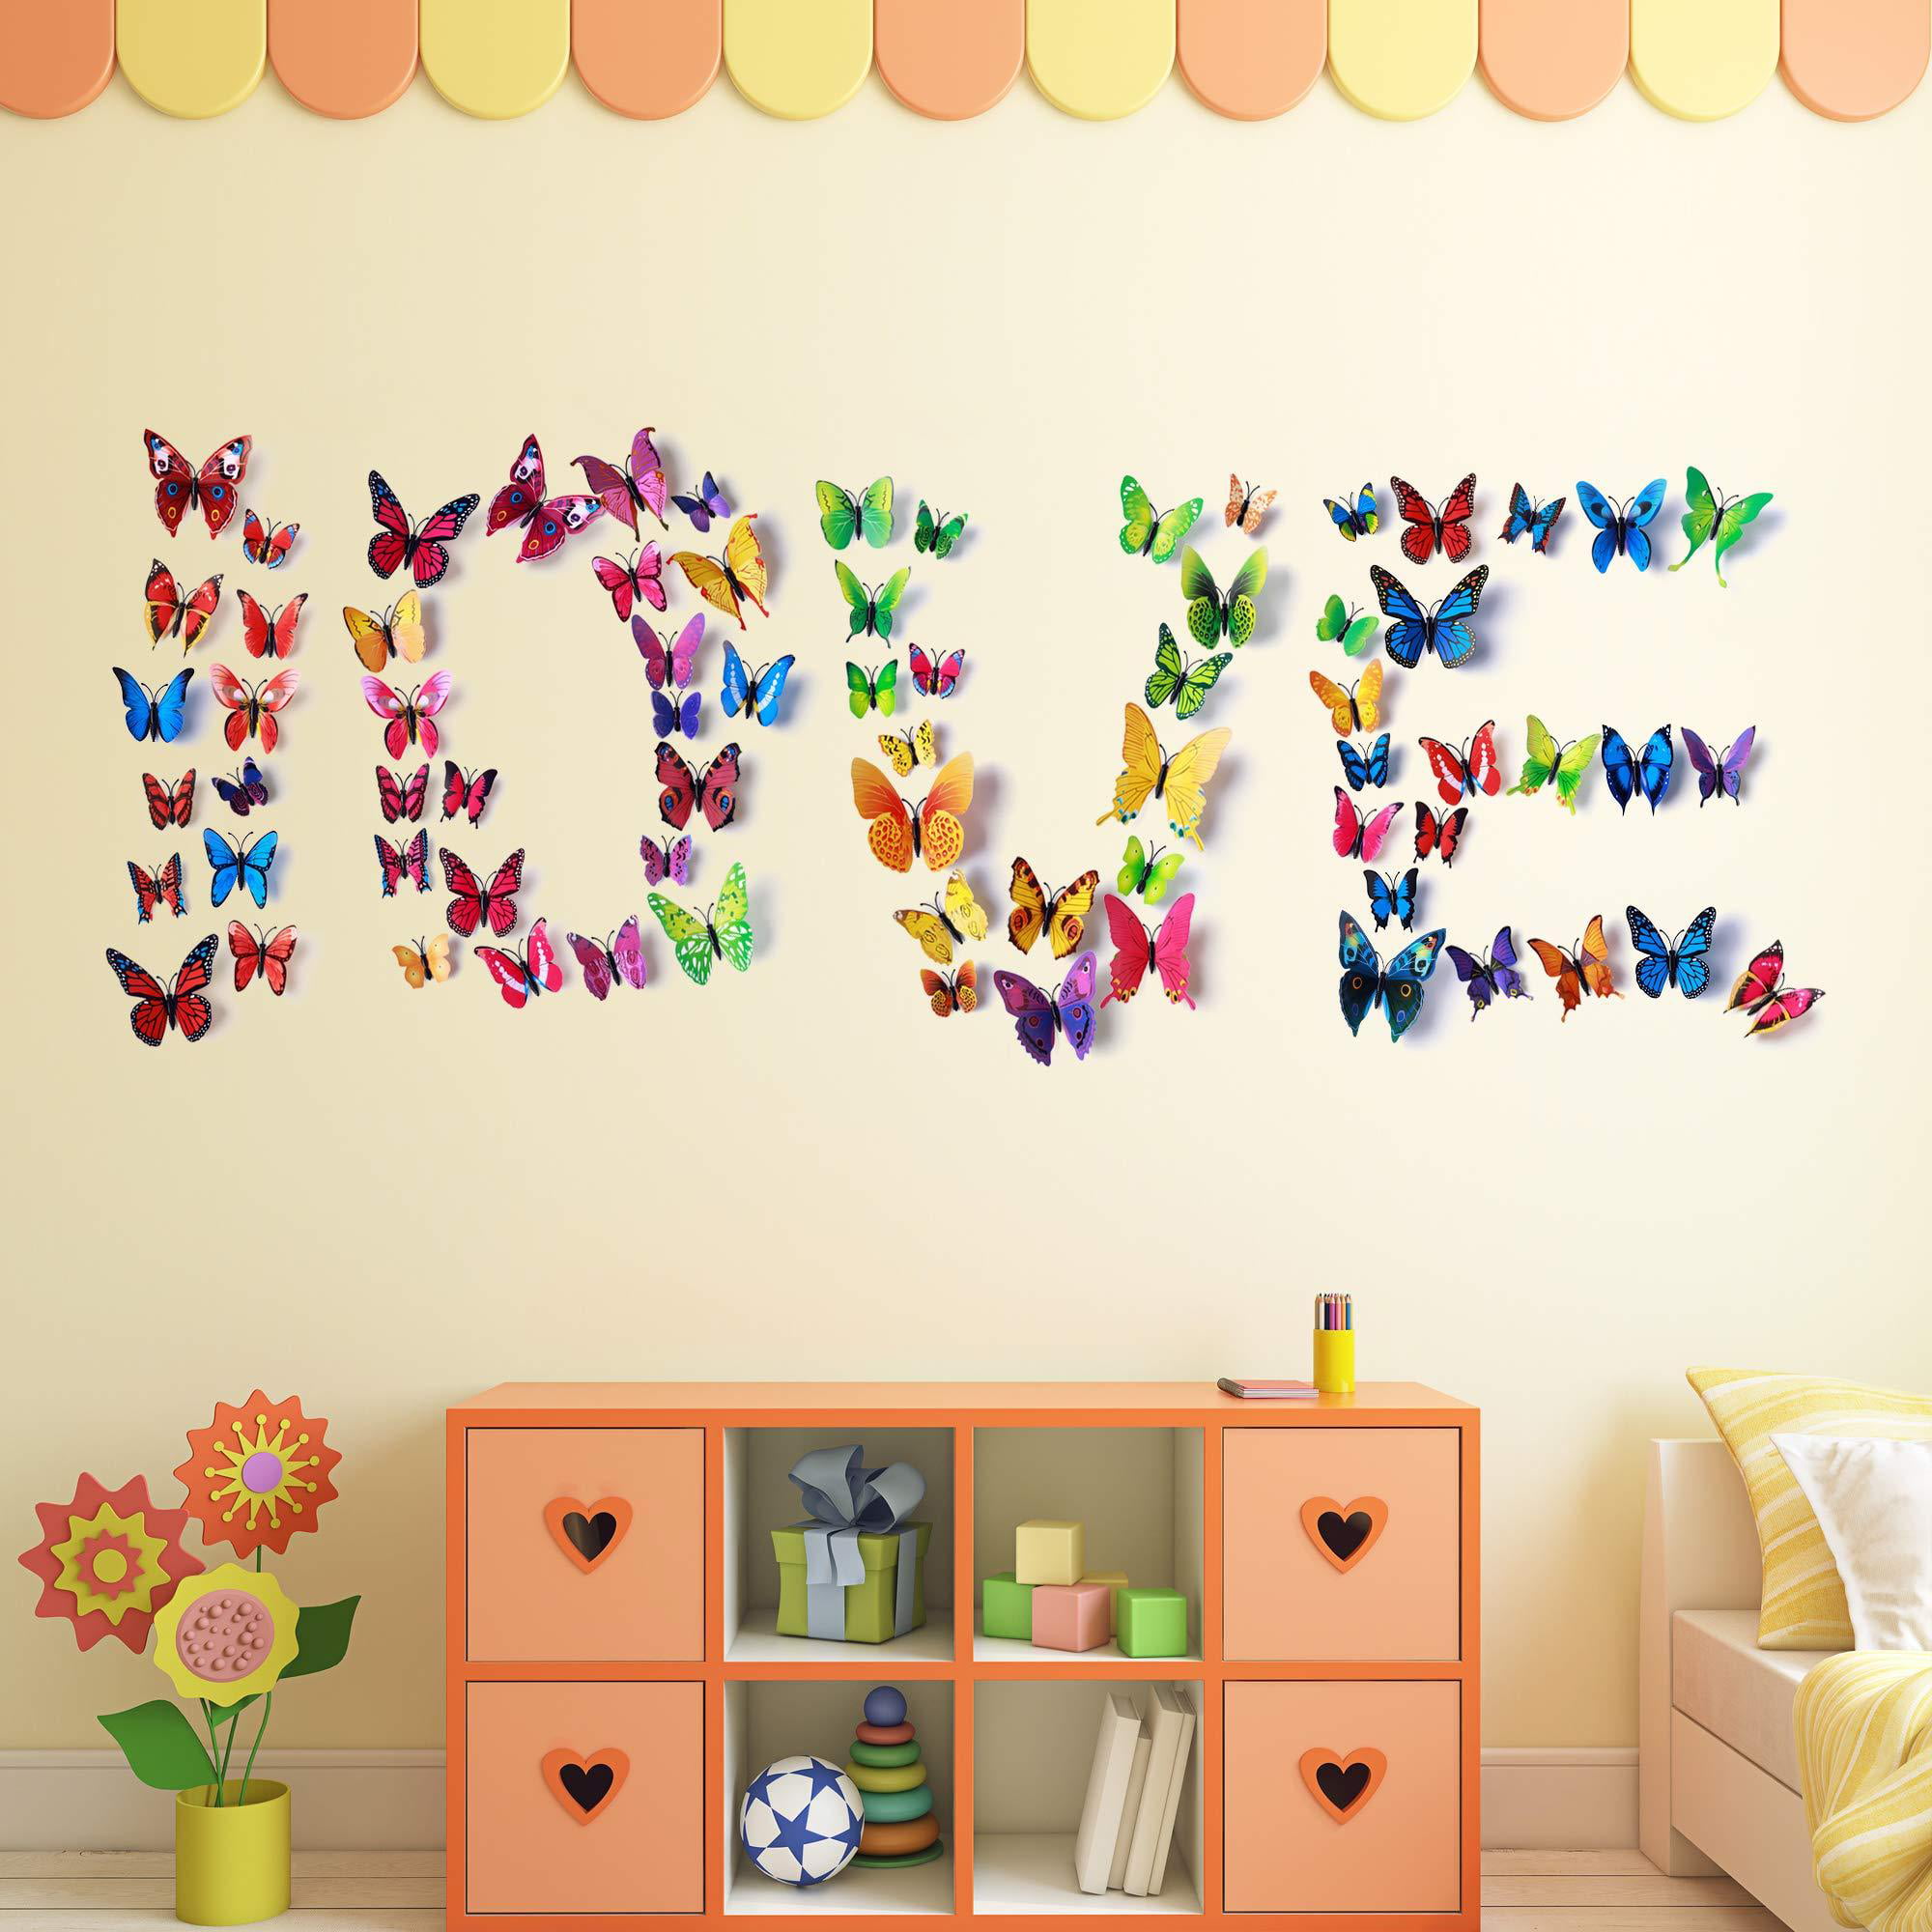 STARVAST 72PCS 3D Butterfly Wall Stickers Removable Wall Art Sticker Decal for Home and Room Decoration 6 Colors 